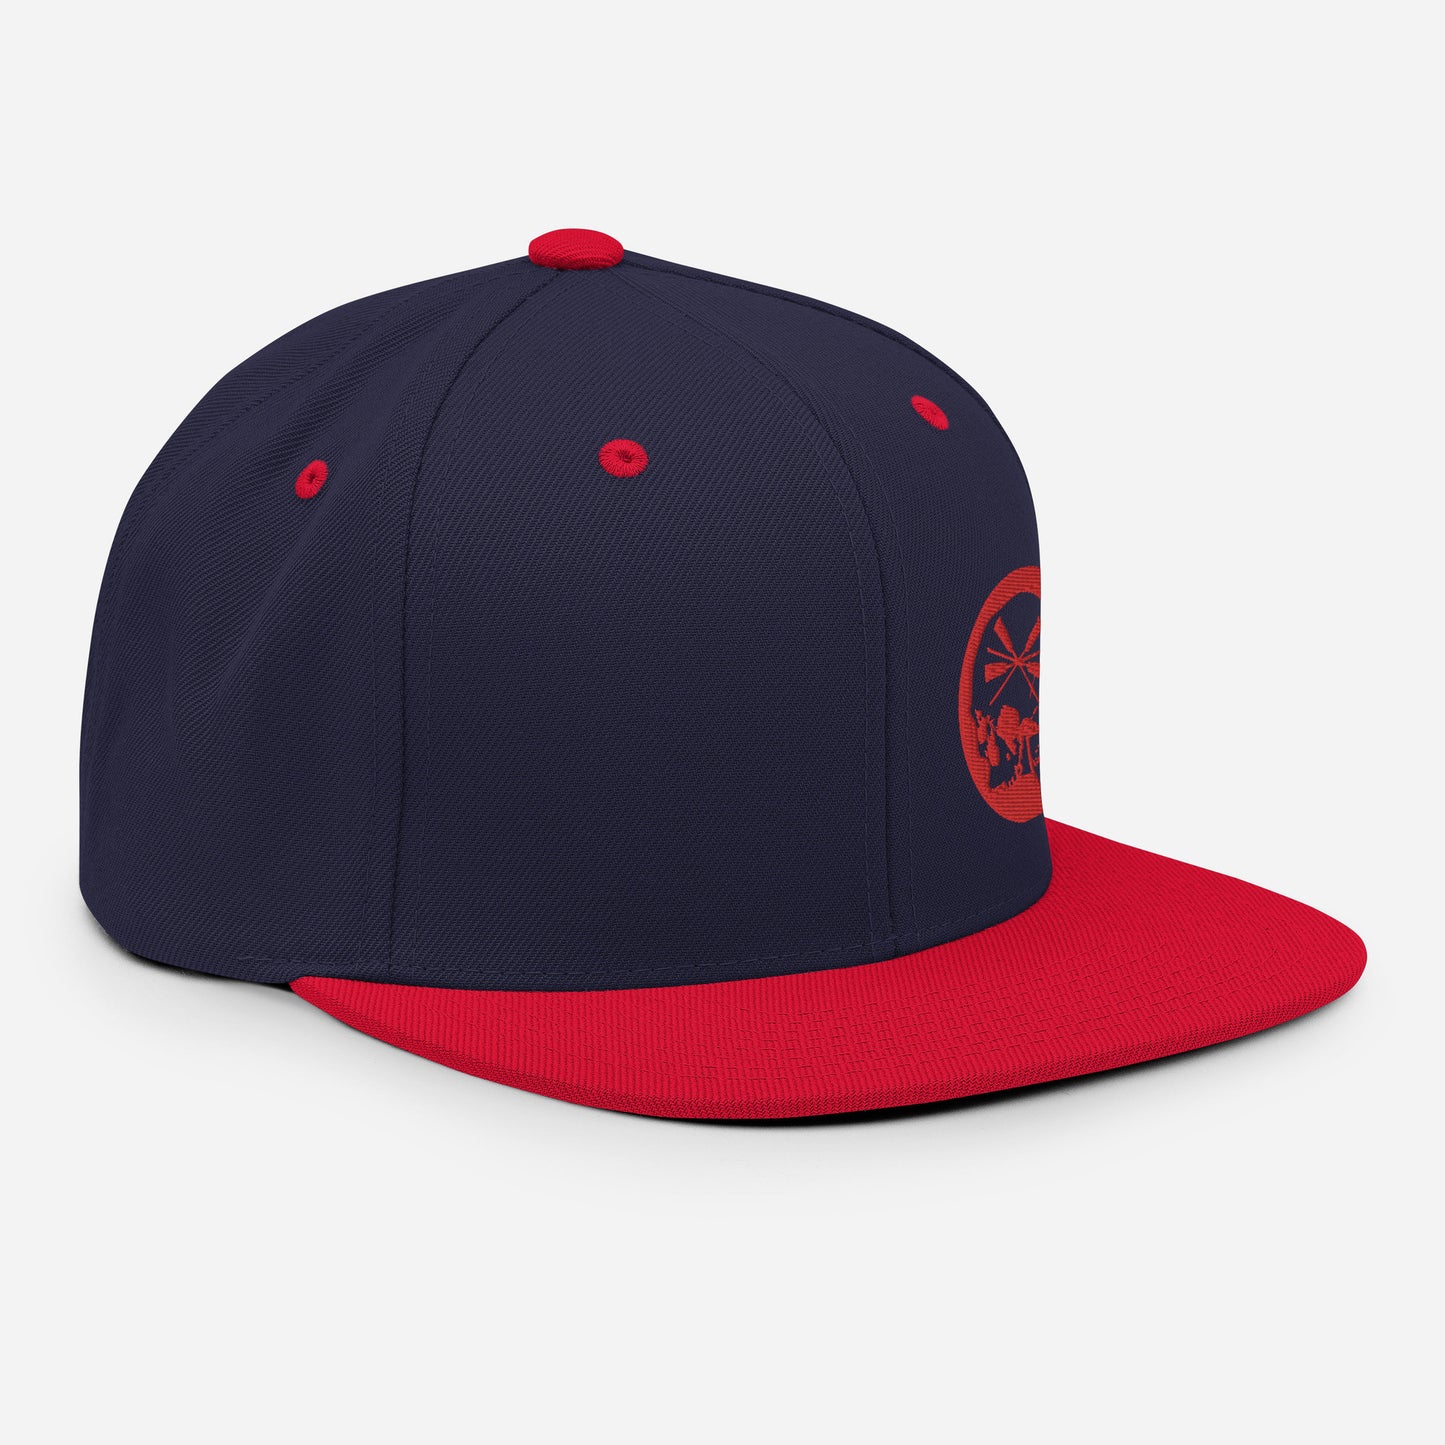 Casquette Snapback Brodé rouge The Needles Factory Free Shipping